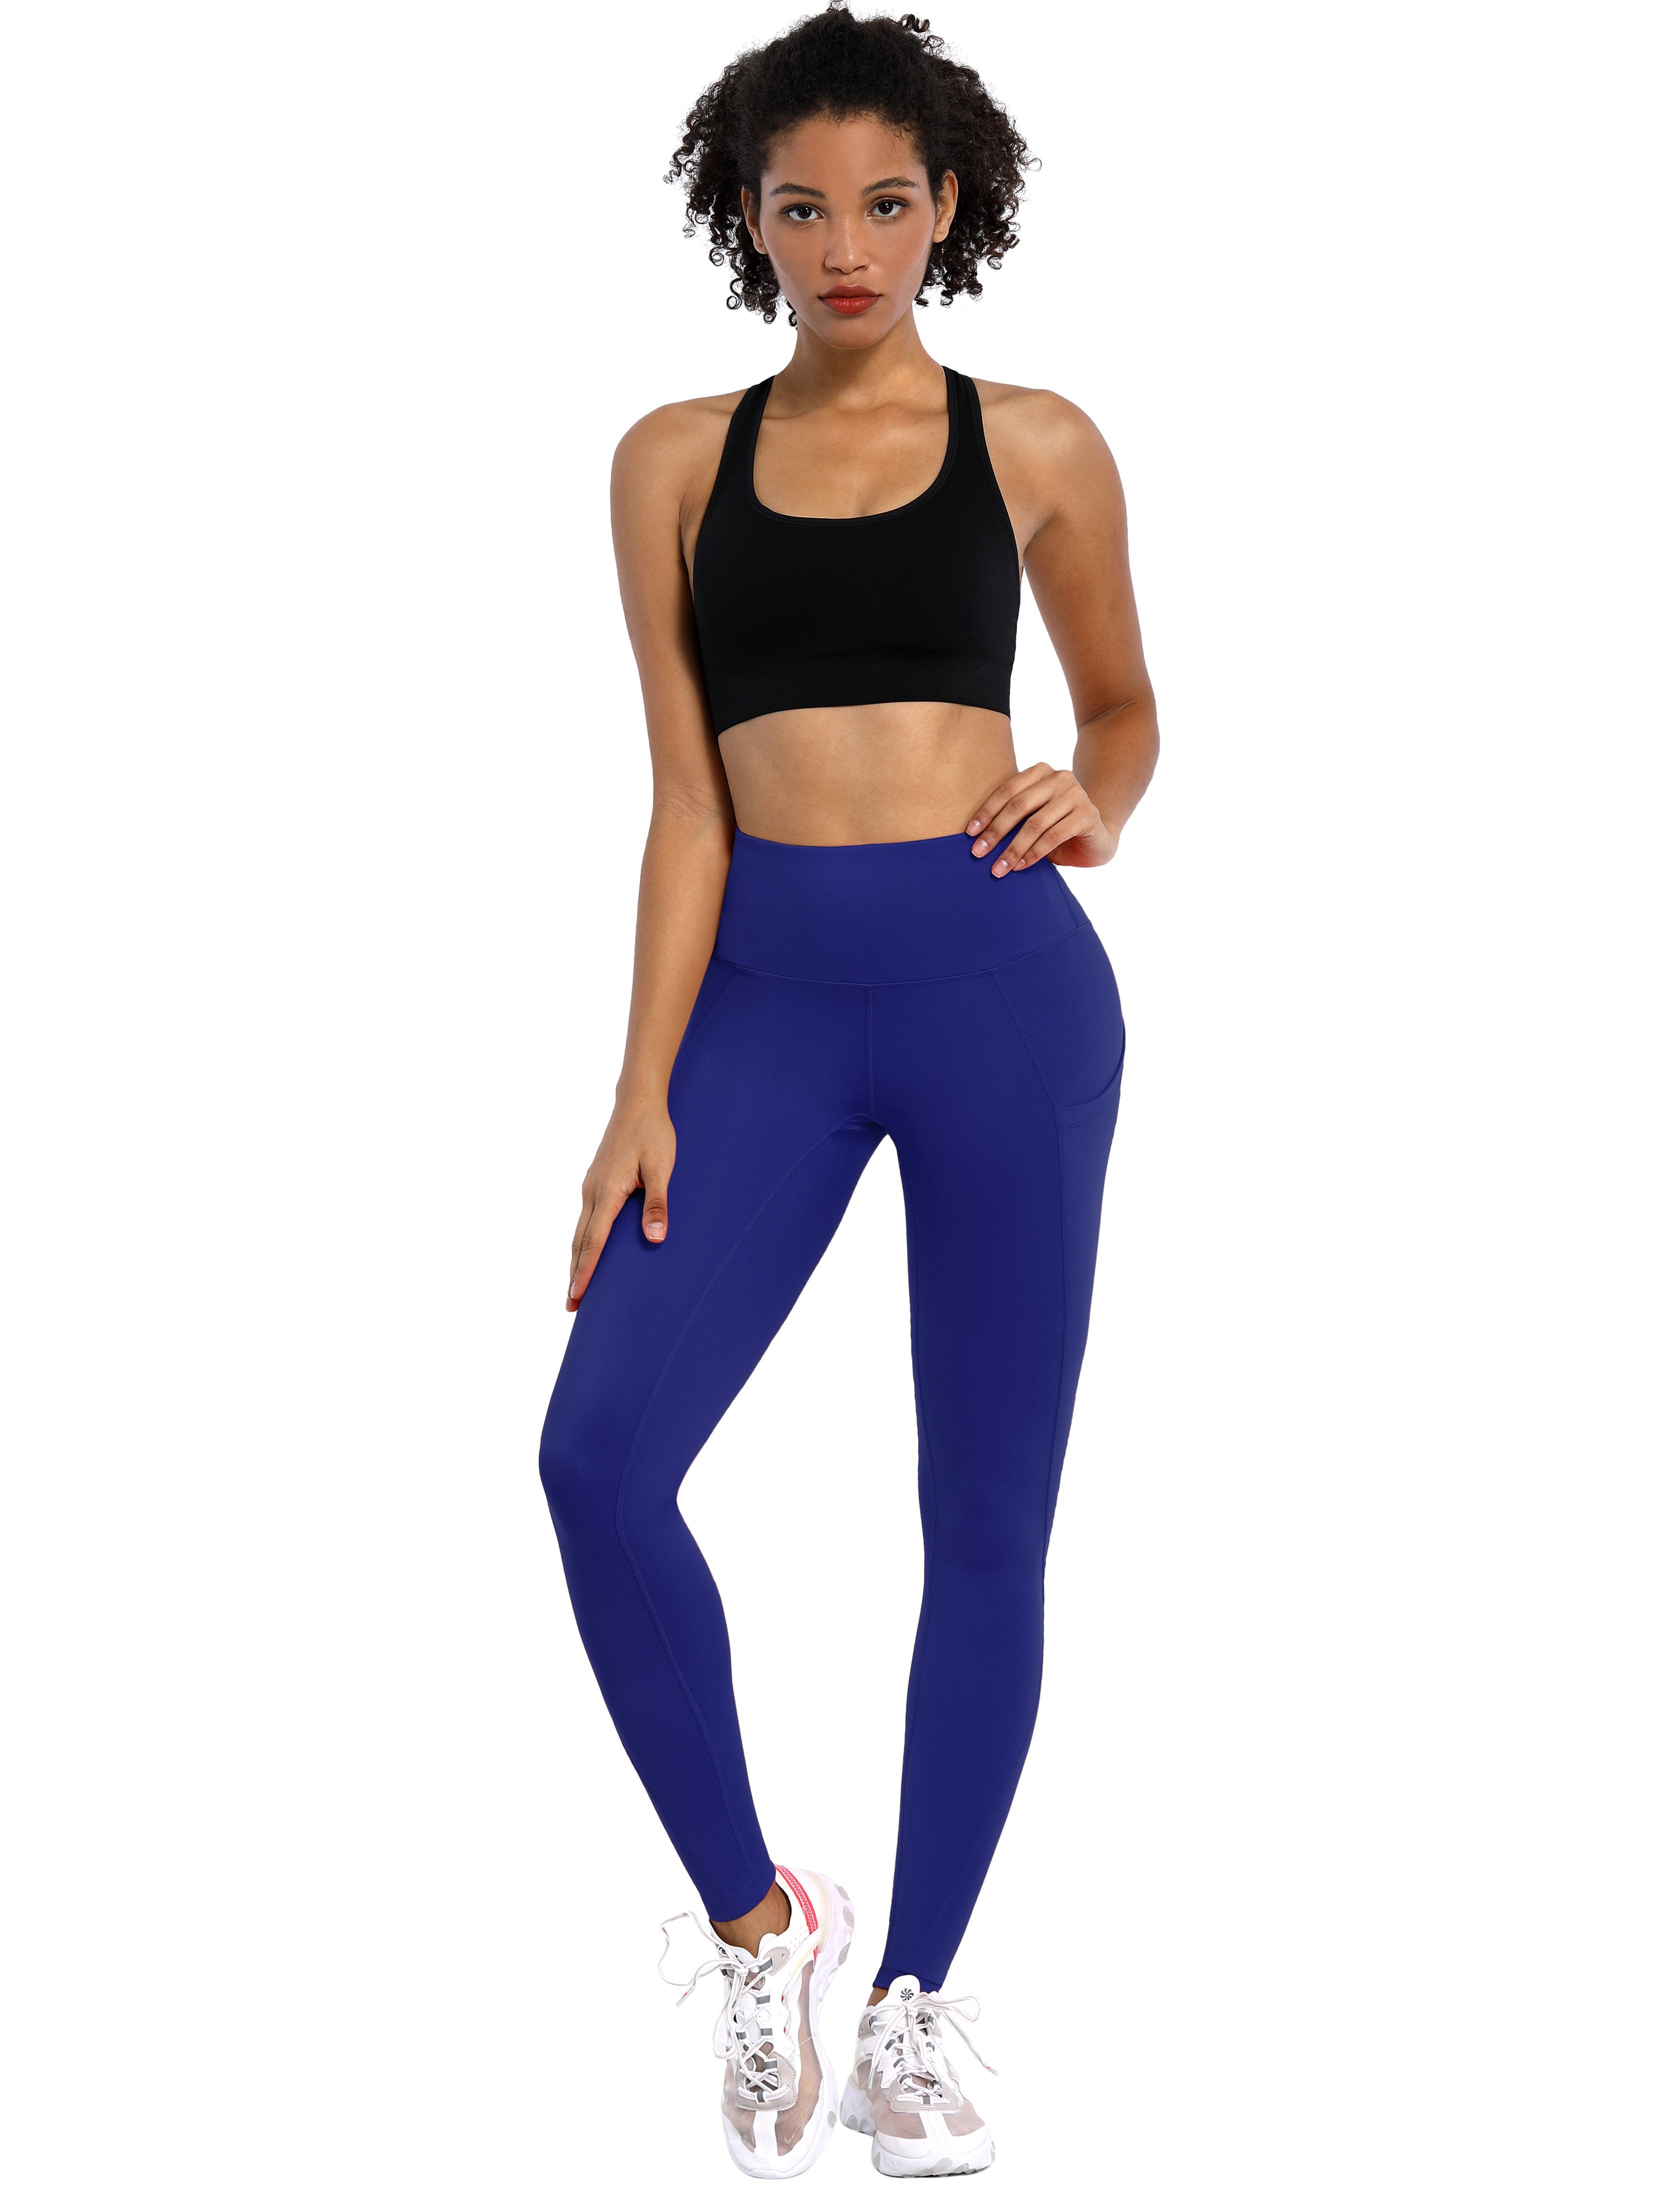 High Waist Side Pockets Gym Pants navy 75% Nylon, 25% Spandex Fabric doesn't attract lint easily 4-way stretch No see-through Moisture-wicking Tummy control Inner pocket